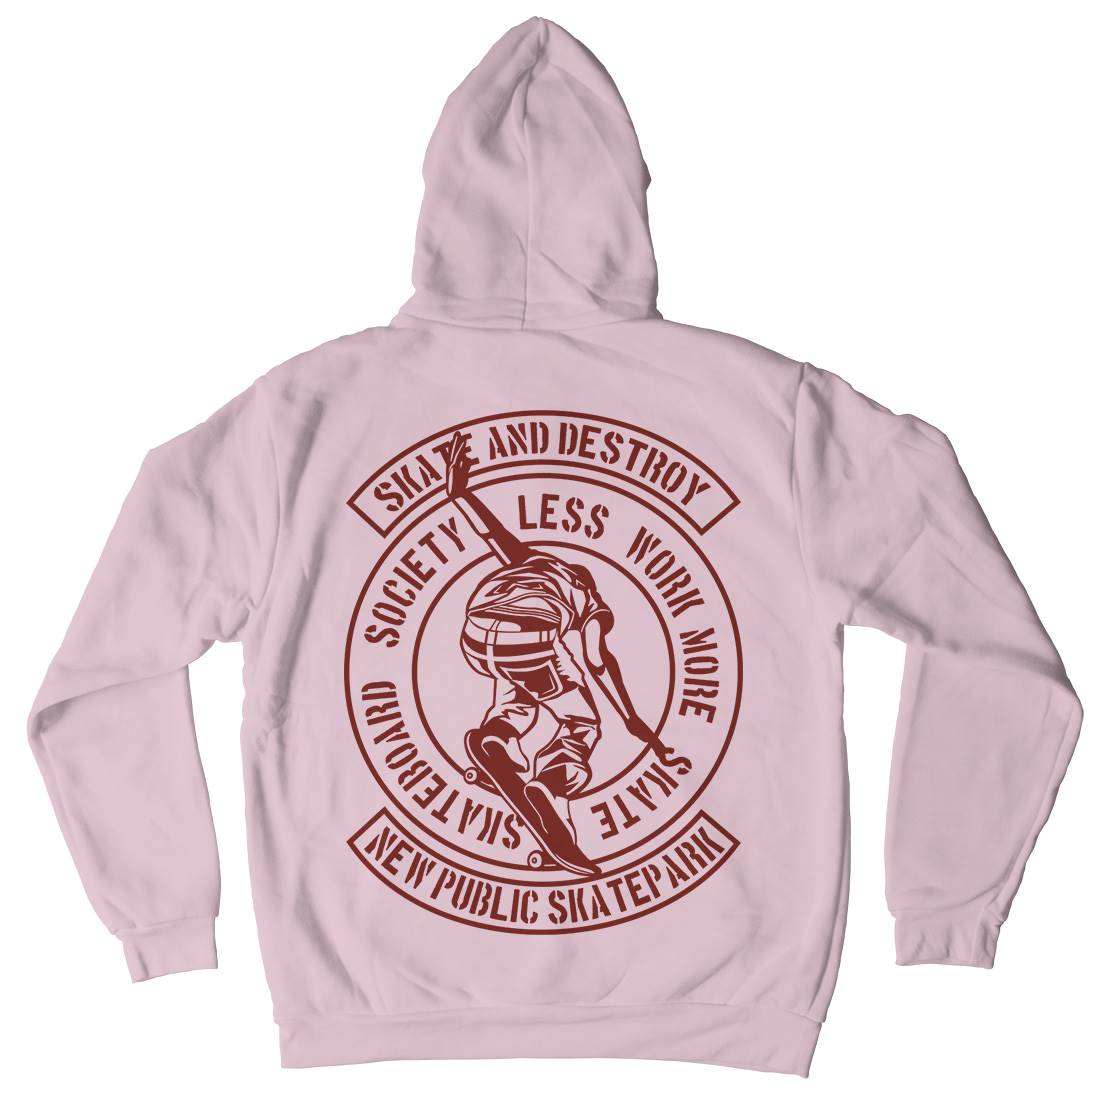 And Destroy Kids Crew Neck Hoodie Skate A142